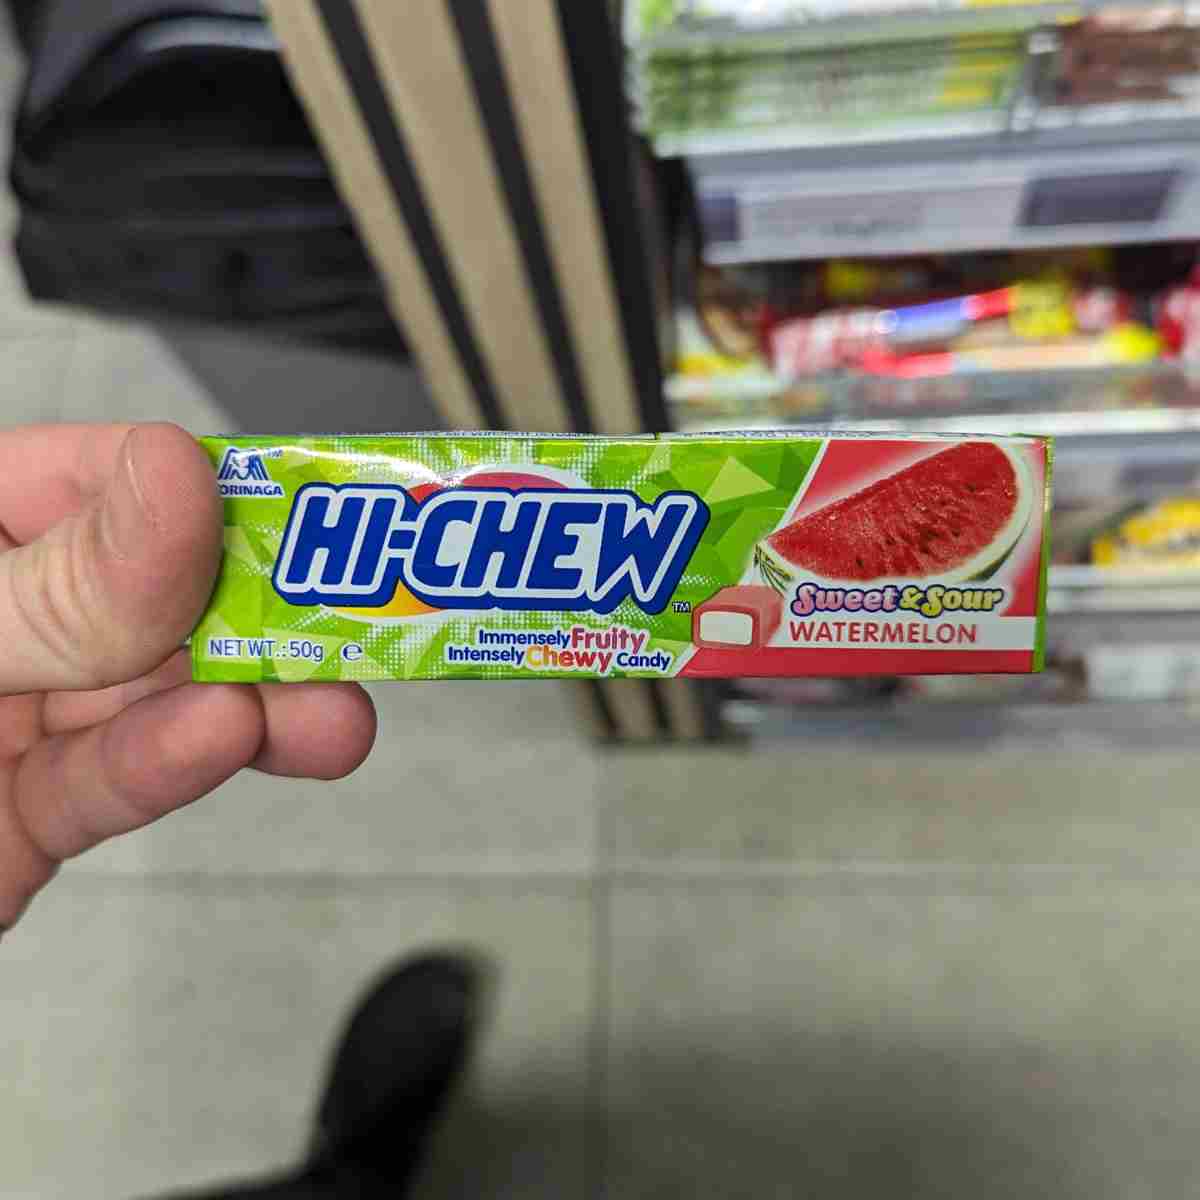 Hichew sweet and sour watermelon